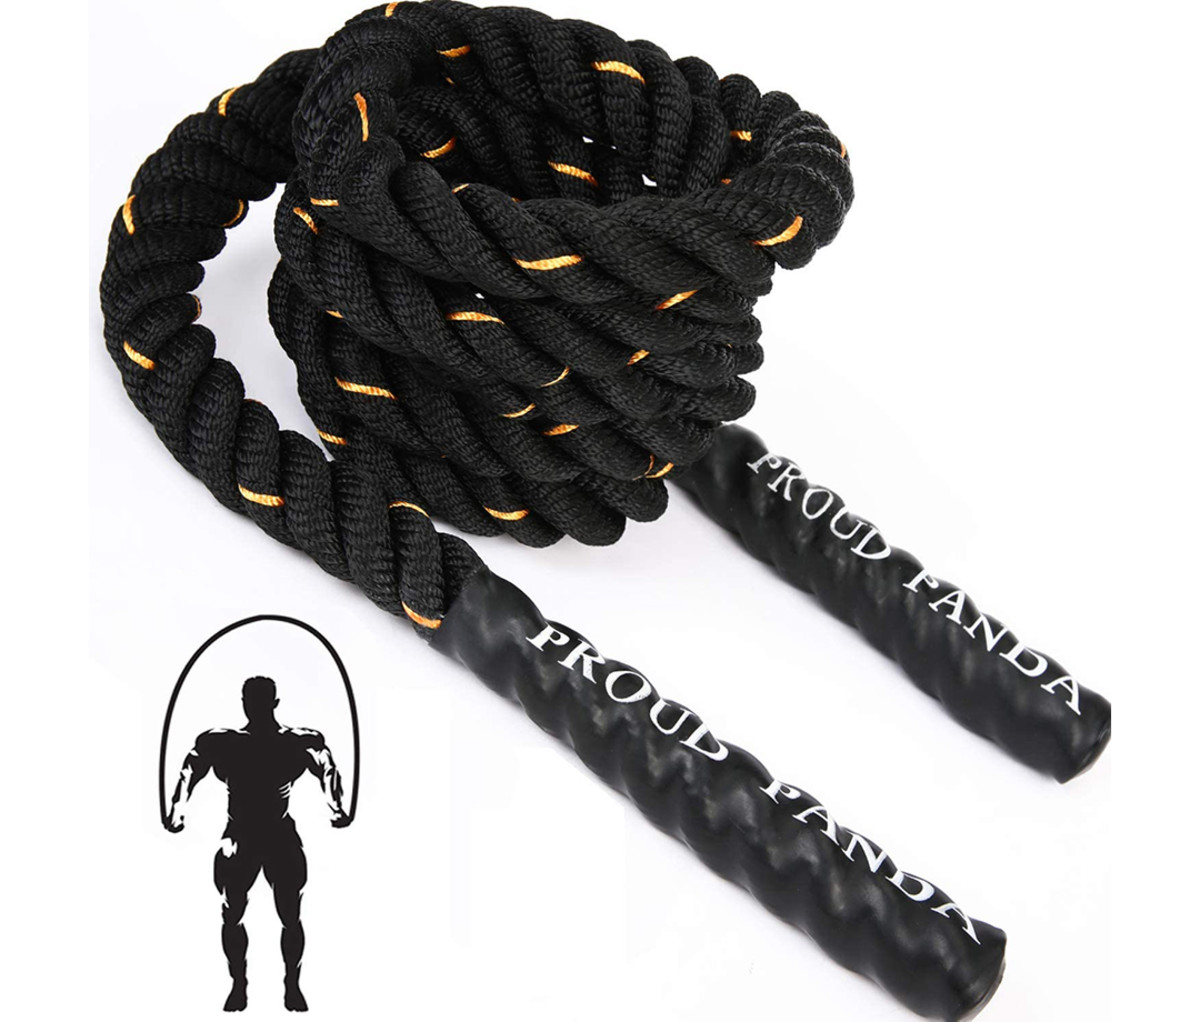 Details about   Weighted Jump Rope 1LB Adjustable Solid PVC Heavy Jump Rope Strength Training 